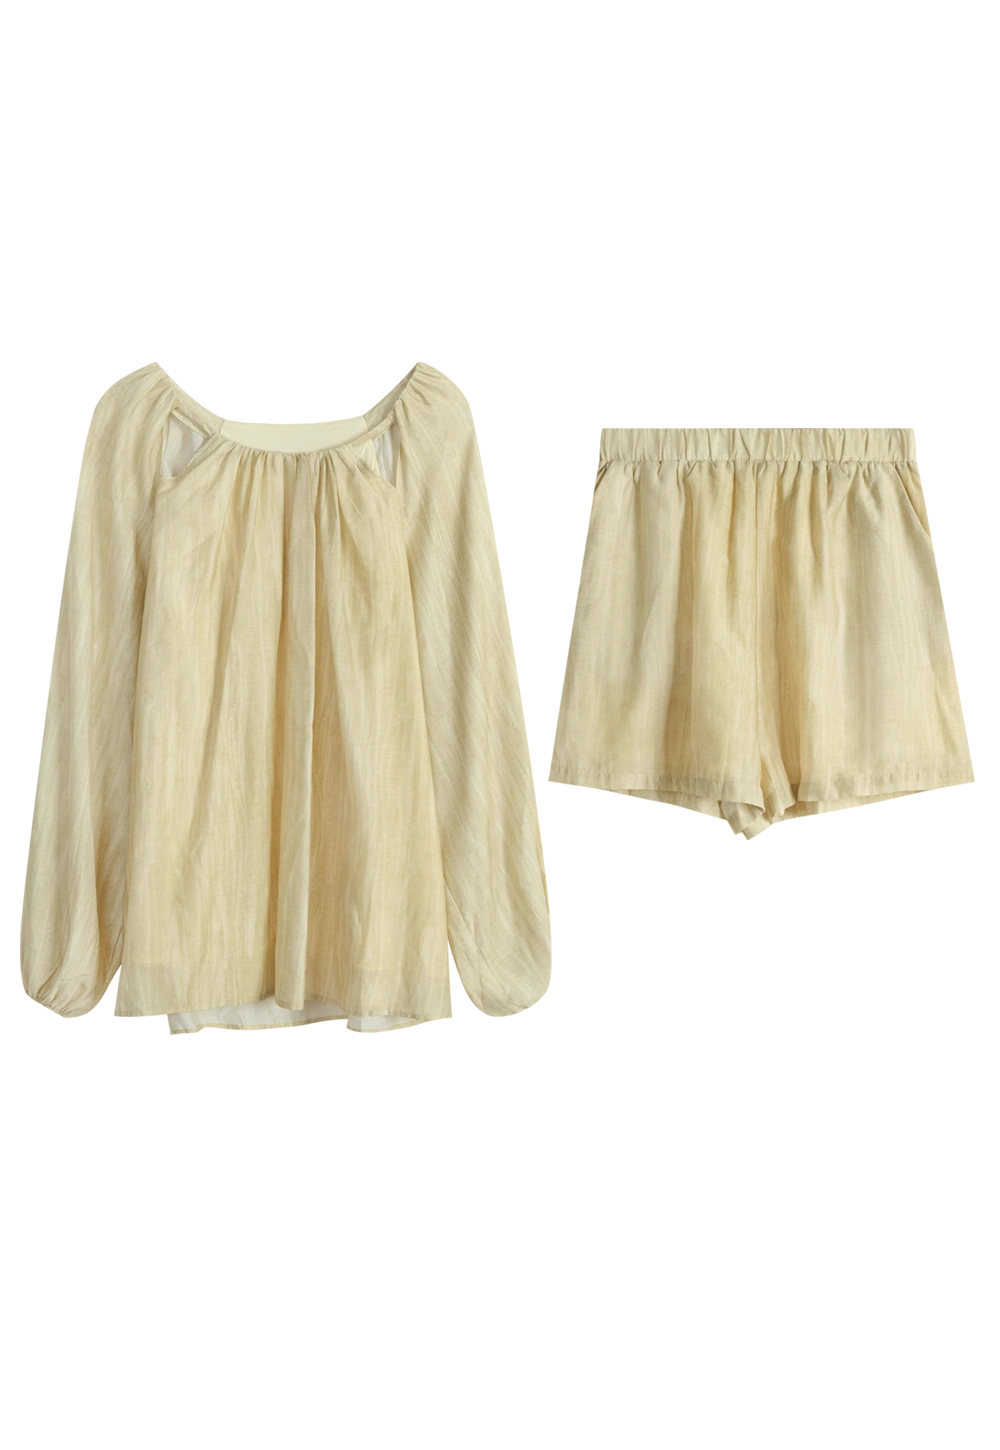 Women's Two-Piece Set: Long Sleeve Blouse and Shorts - Lightweight Fabric